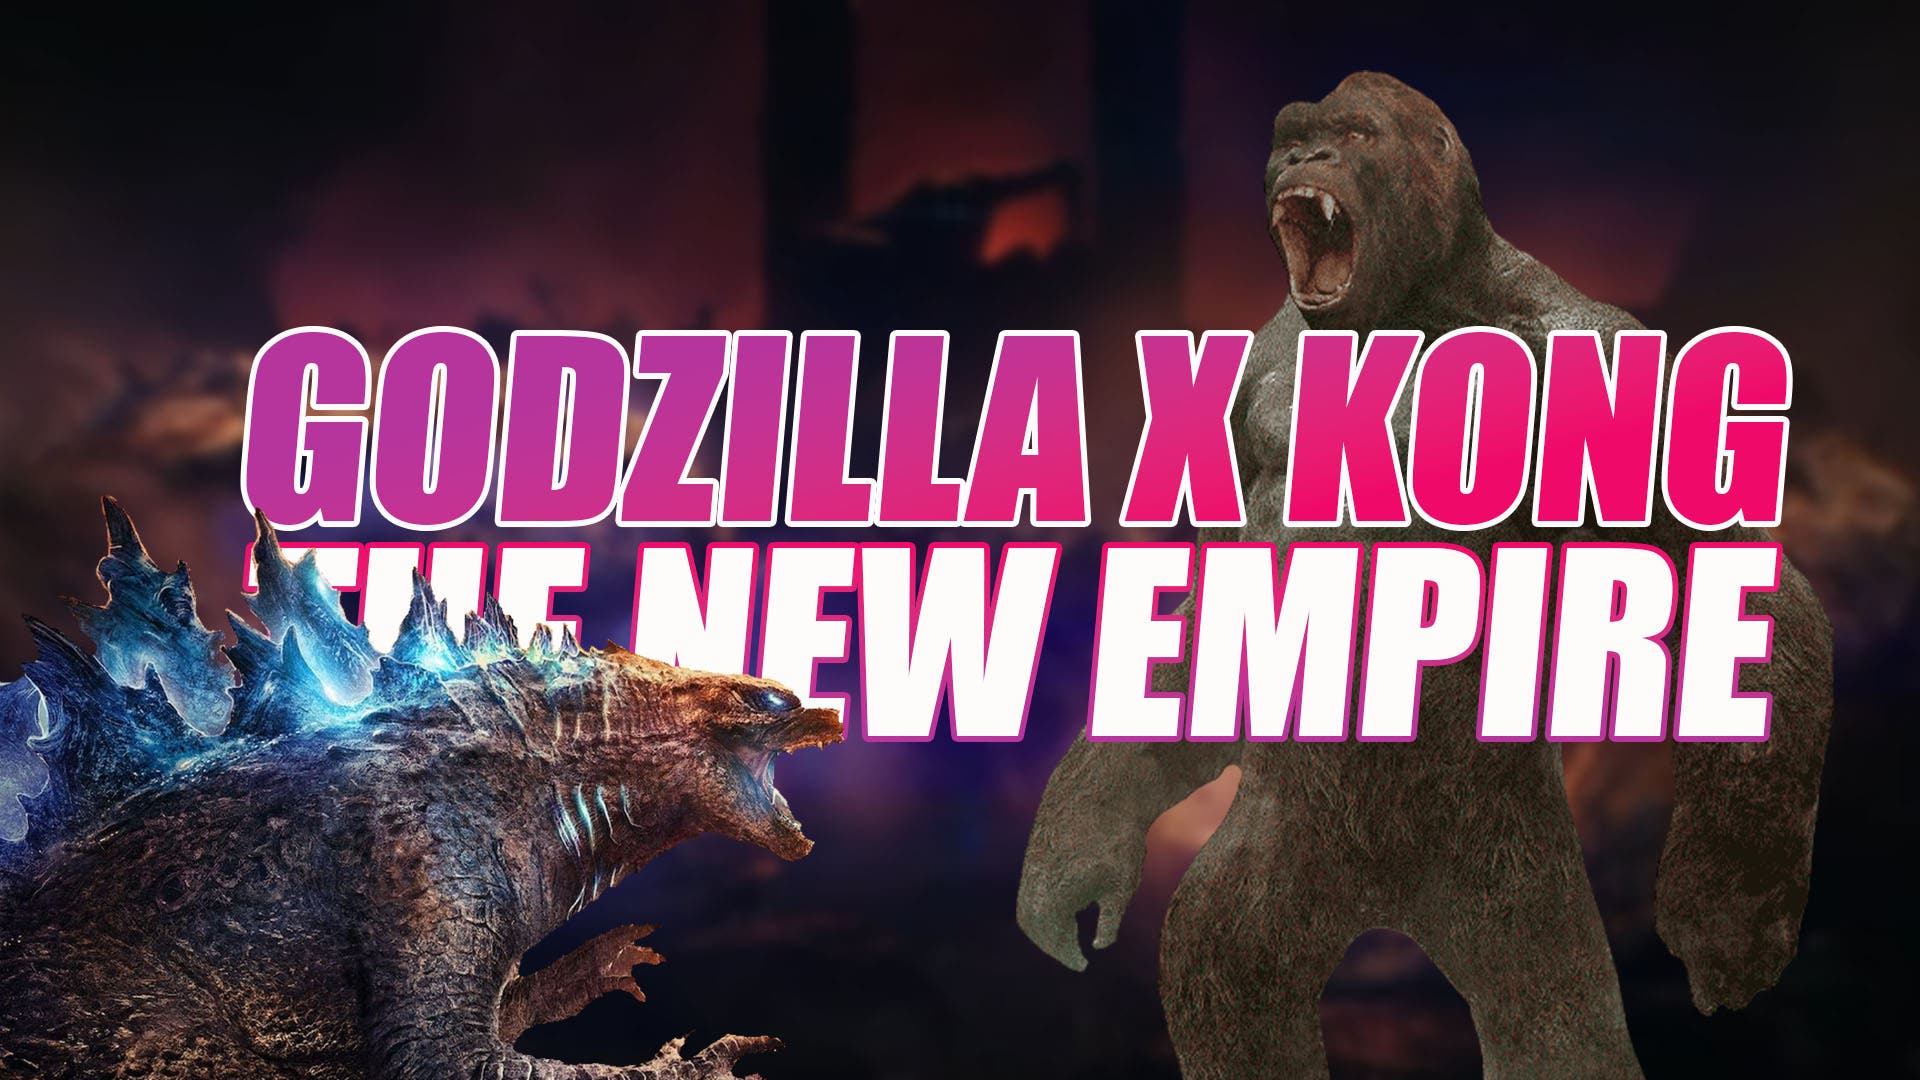 Release Date, Synopsis And First Teaser Of Godzilla X Kong The New